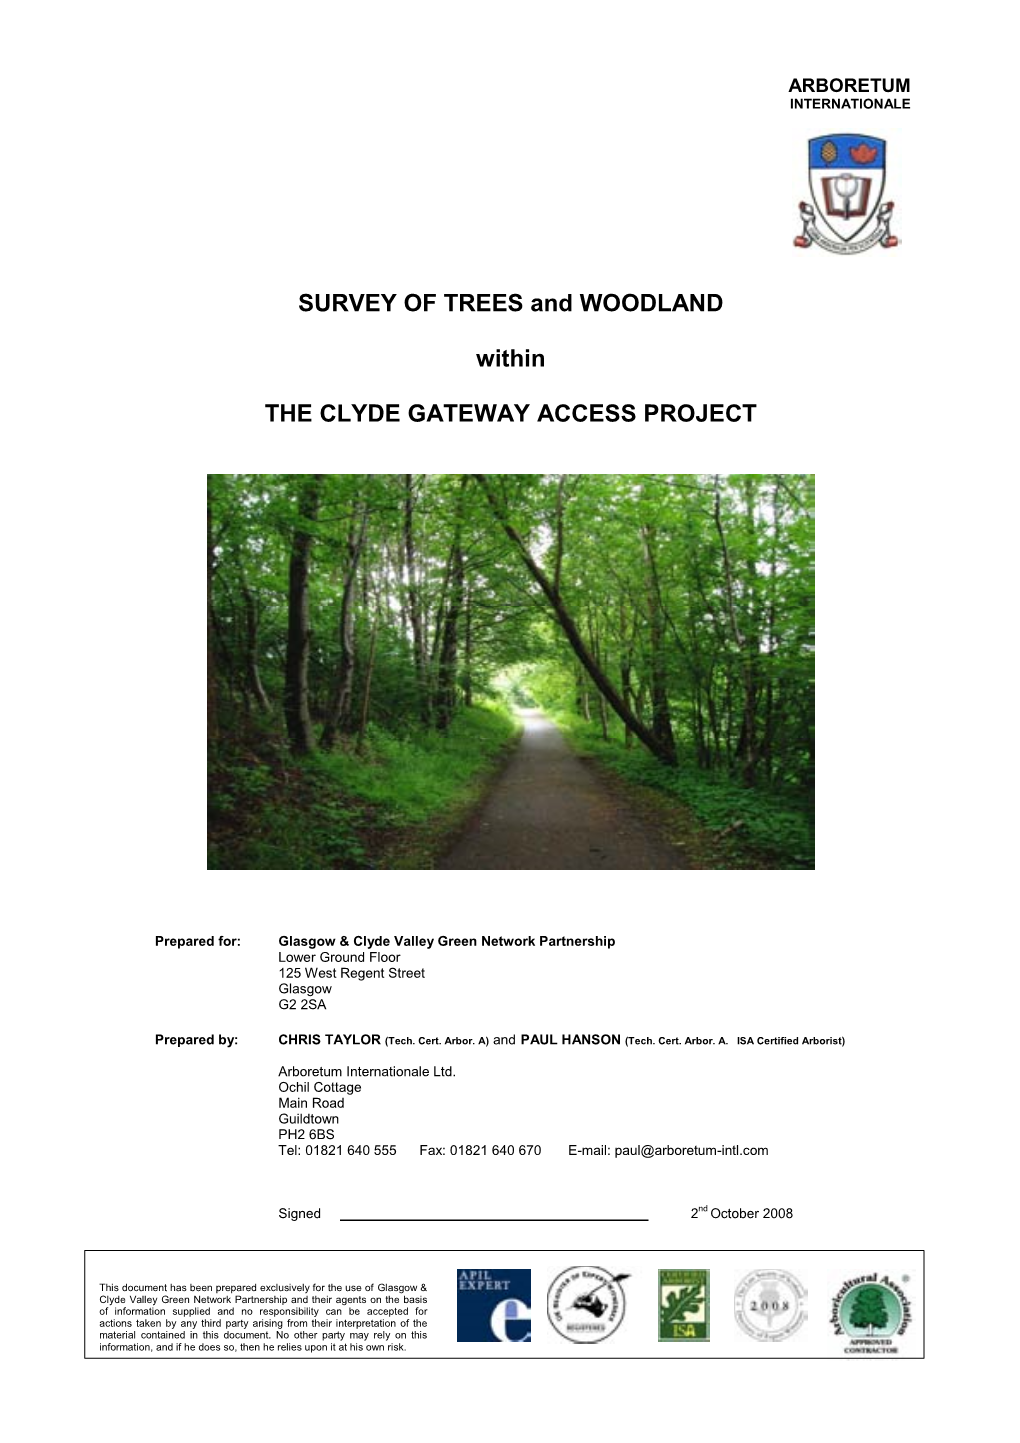 SURVEY of TREES and WOODLAND Within the CLYDE